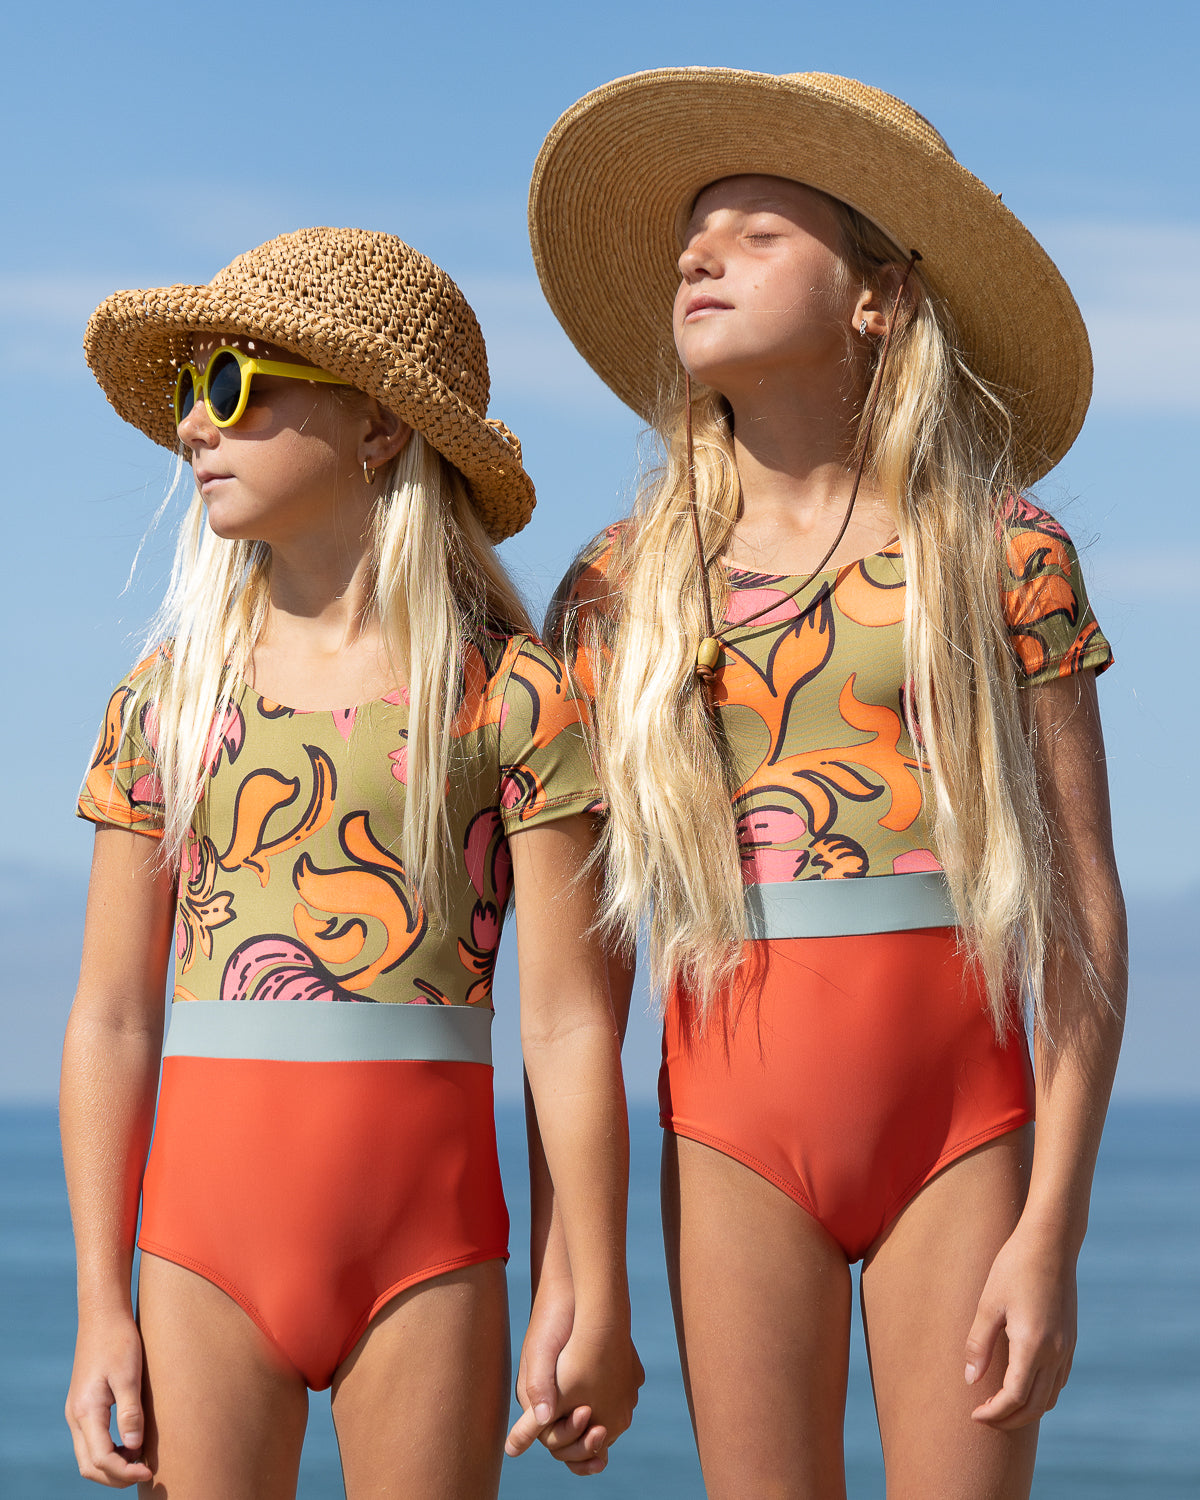 Has Tons of Deals Under $50 on Trendy One-Piece Swimsuits